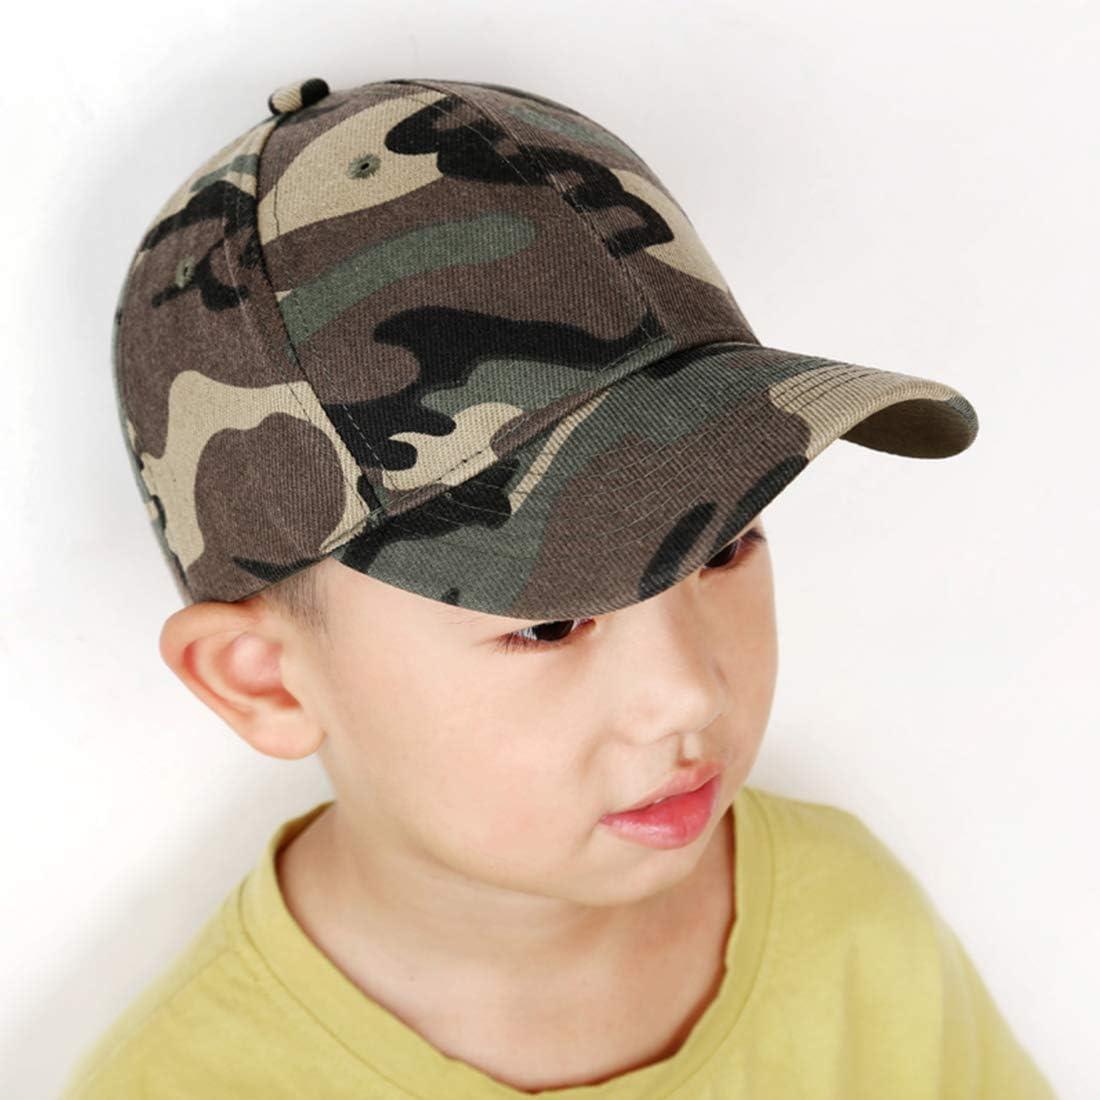 American Trends Toddler Baseball Hat for Toddler Boy Kids Adjustable  Baseball Cap Camouflage Boys Hat 3-8 Years A Army Green Camouflage